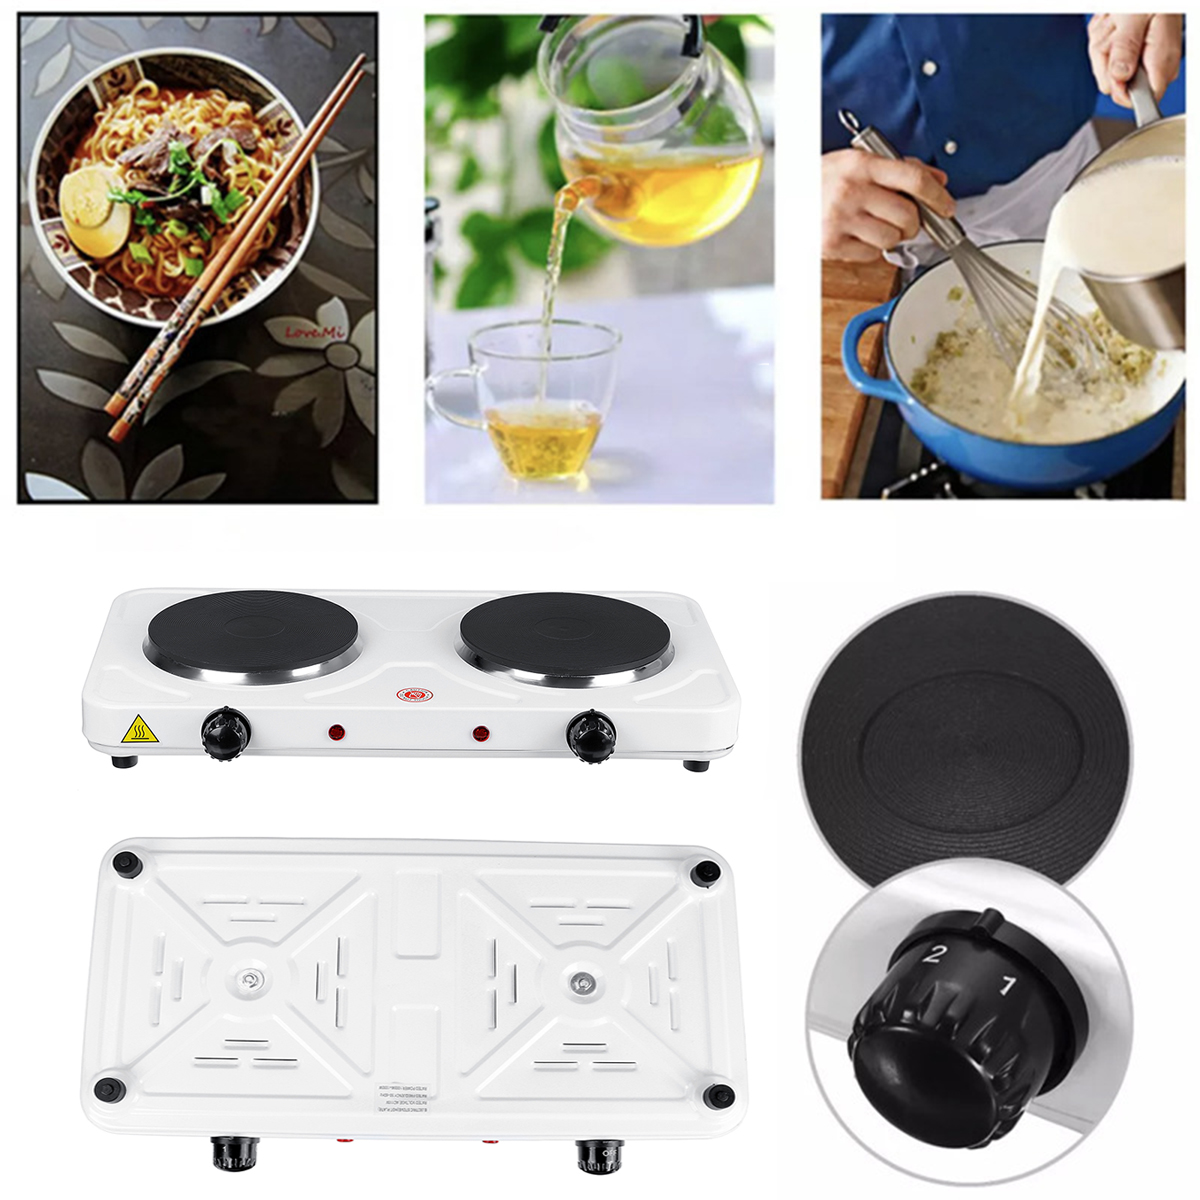 110V-2000W-Portable-Double-Electric-Stove-Burner-Hot-Plate-Cooking-Heater-1730241-2